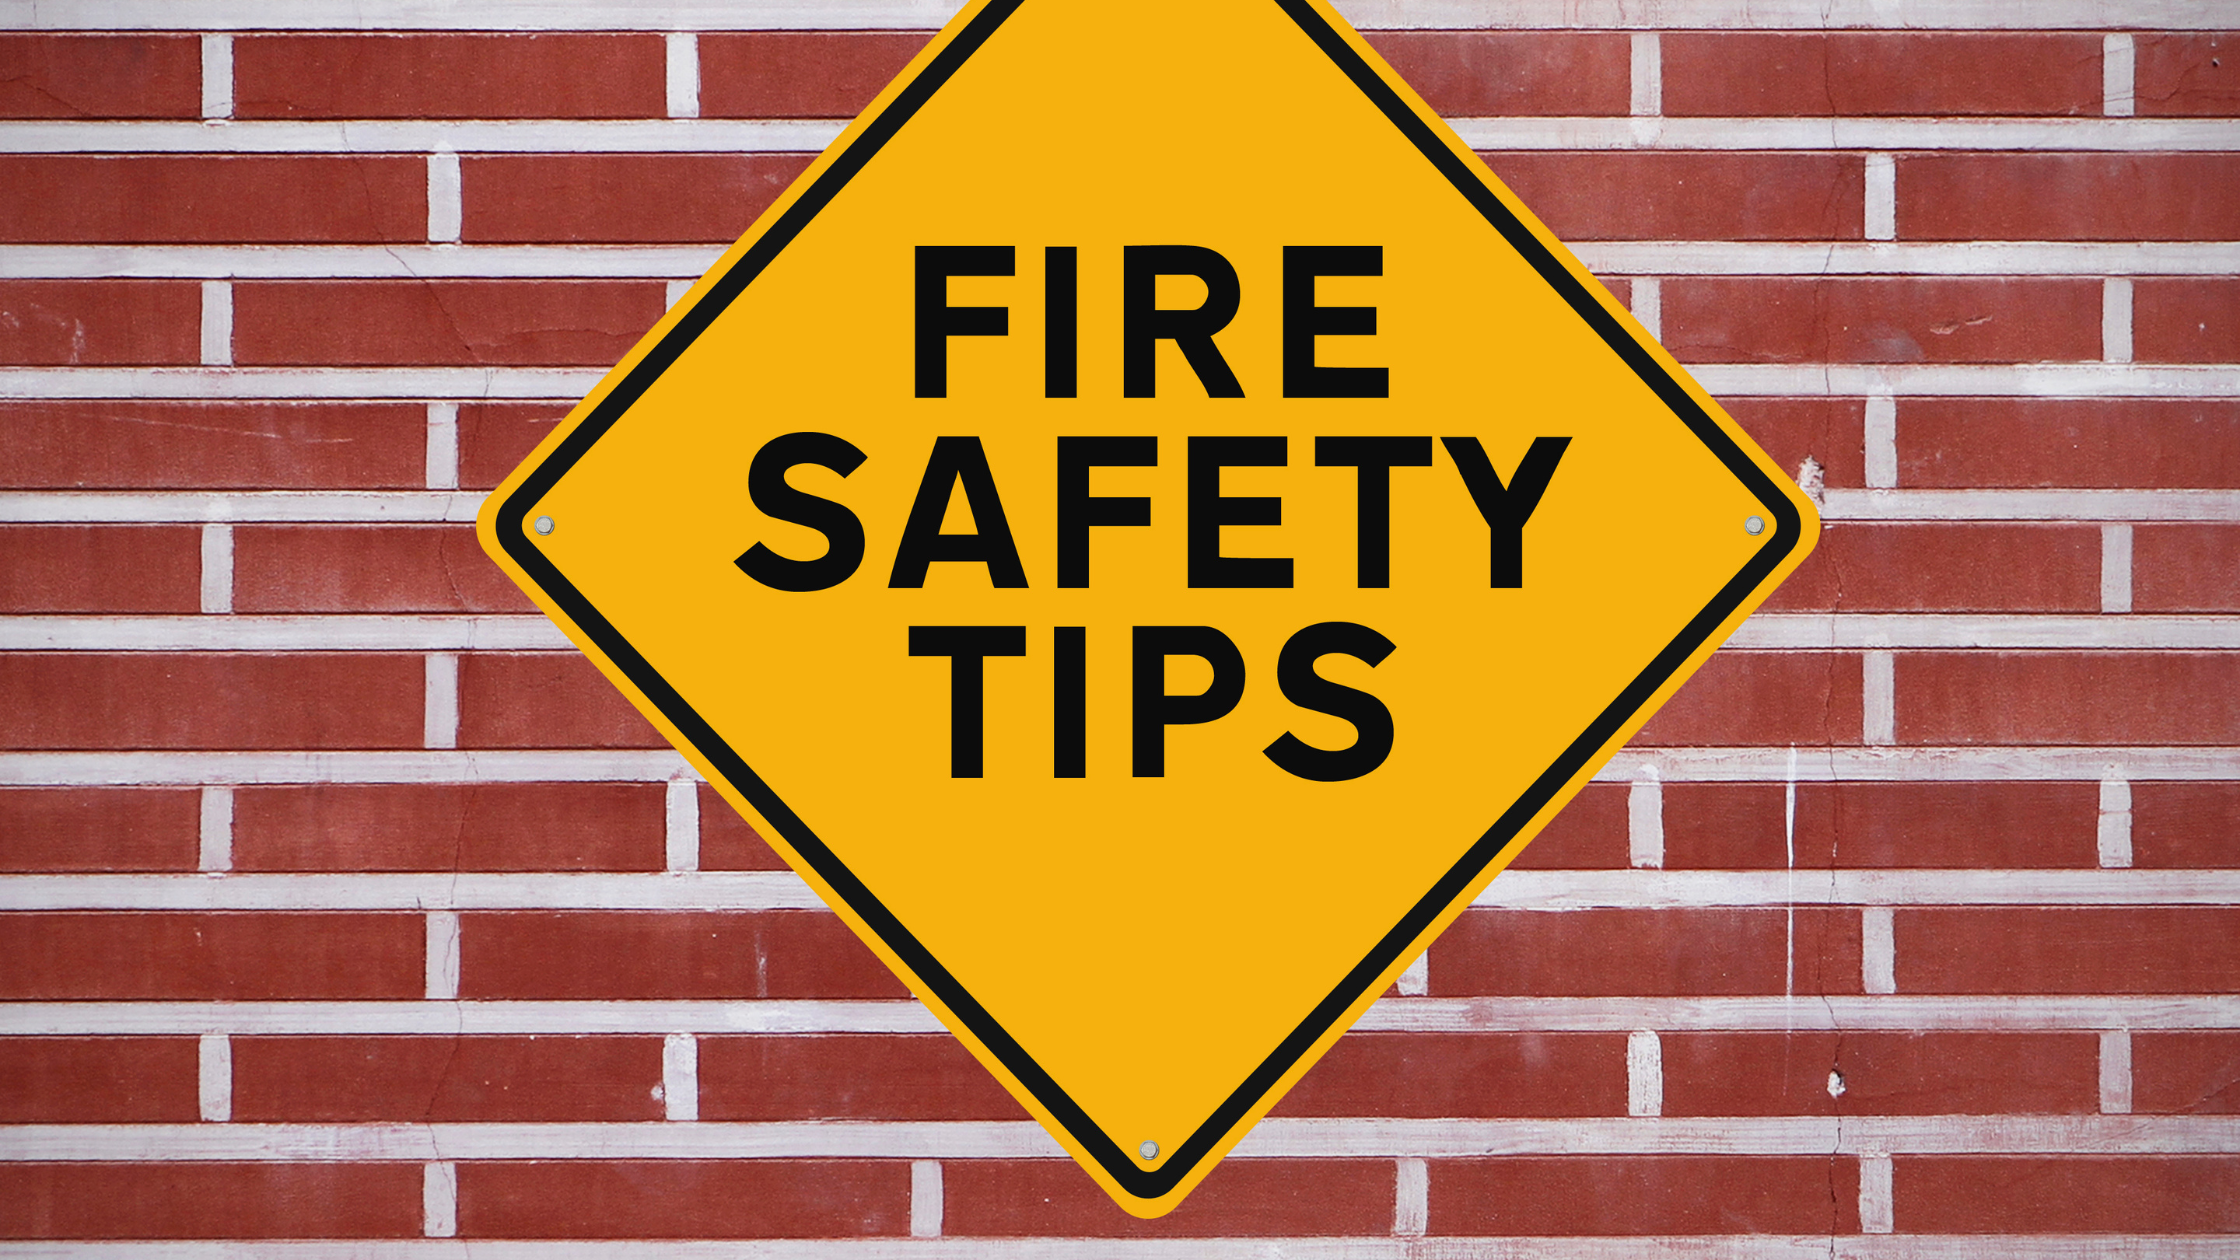 https://handymanconnection.com/wp-content/uploads/2022/10/fire-safety-tips.png